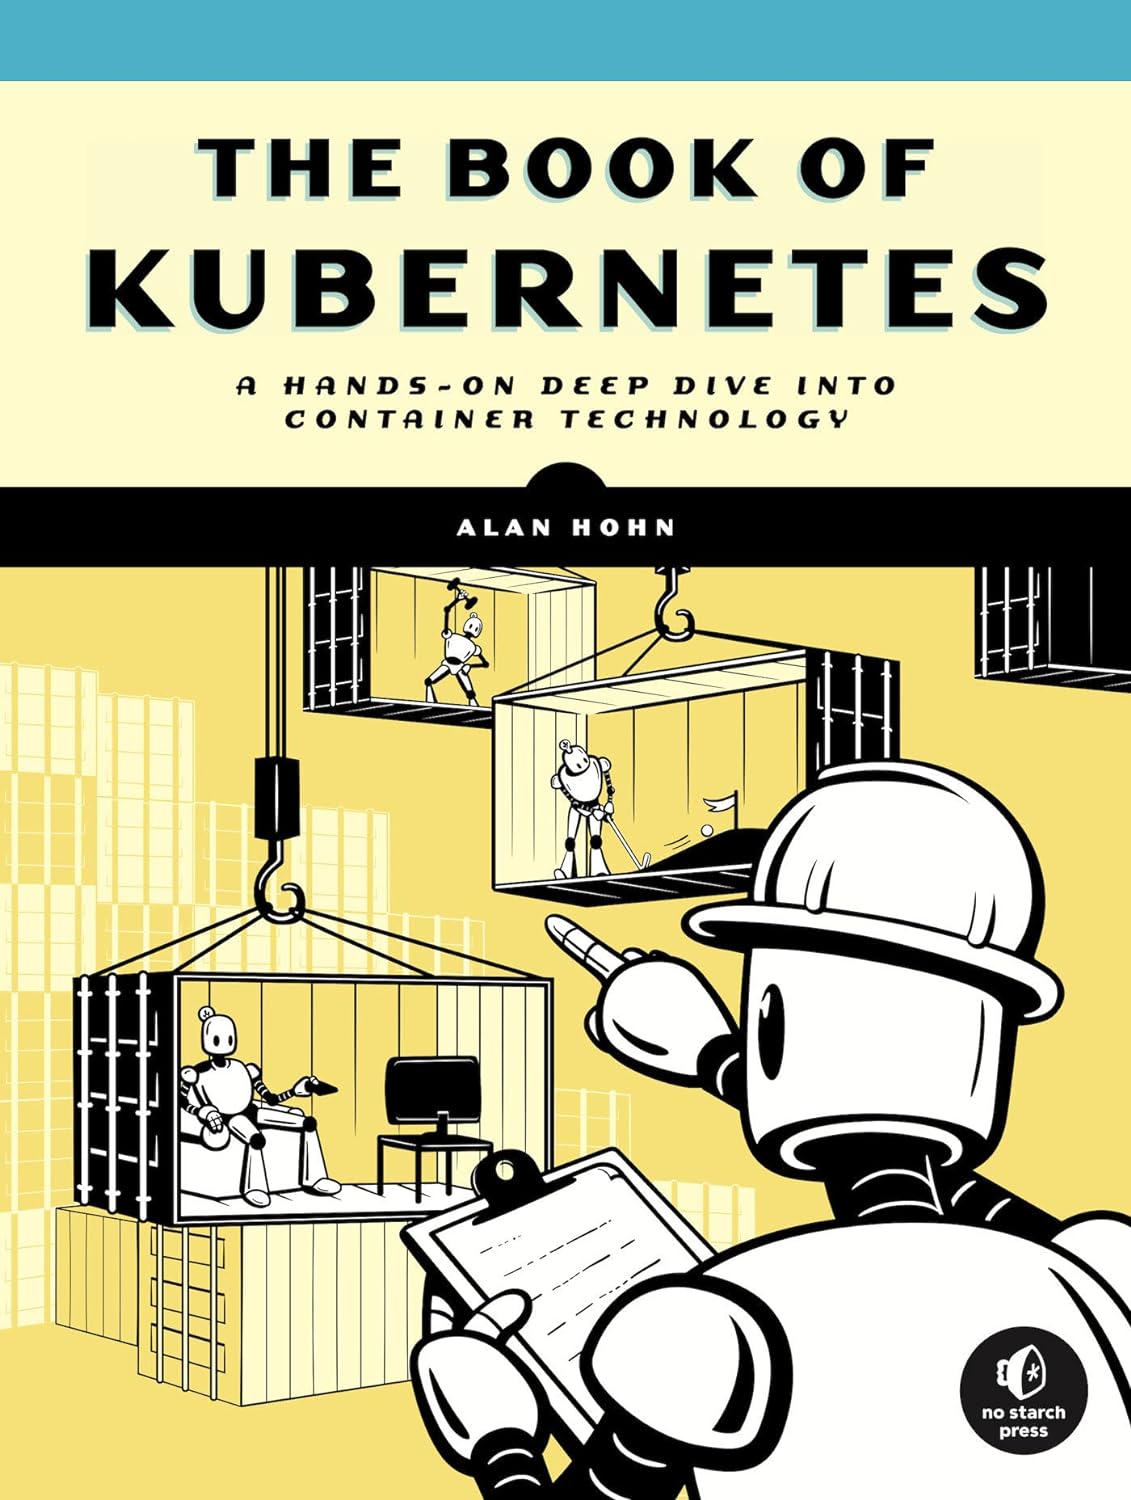 The Book of Kubernetes: A Complete Guide to Container Orchestration by Alan Hohn 